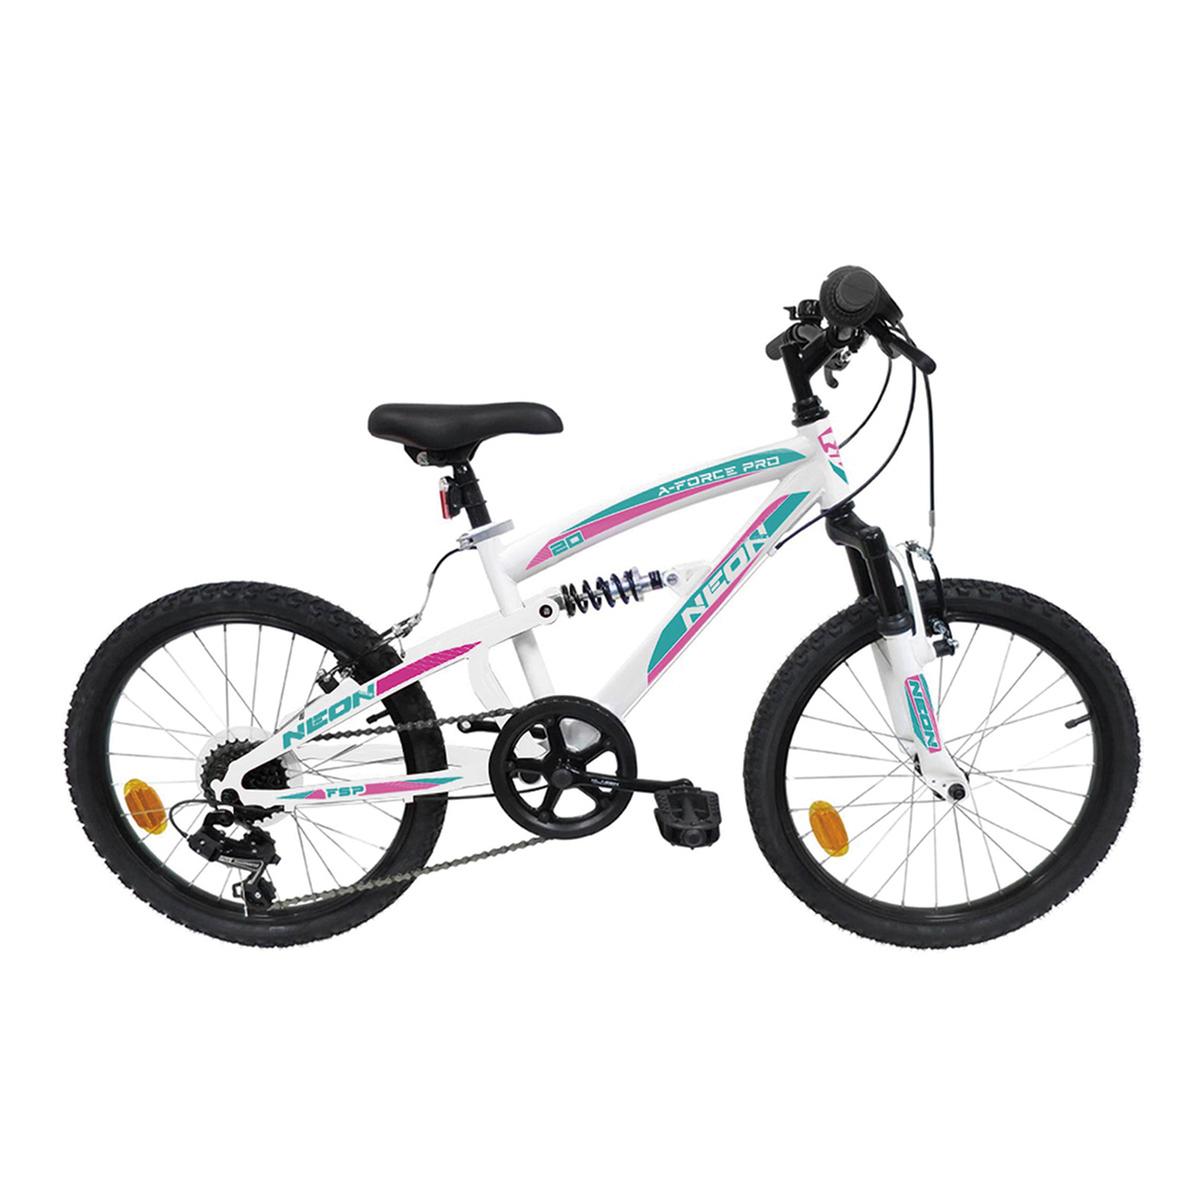 Bicicleta A-Force G 20 (varios colores) | Toys R' Us Toys"R"Us